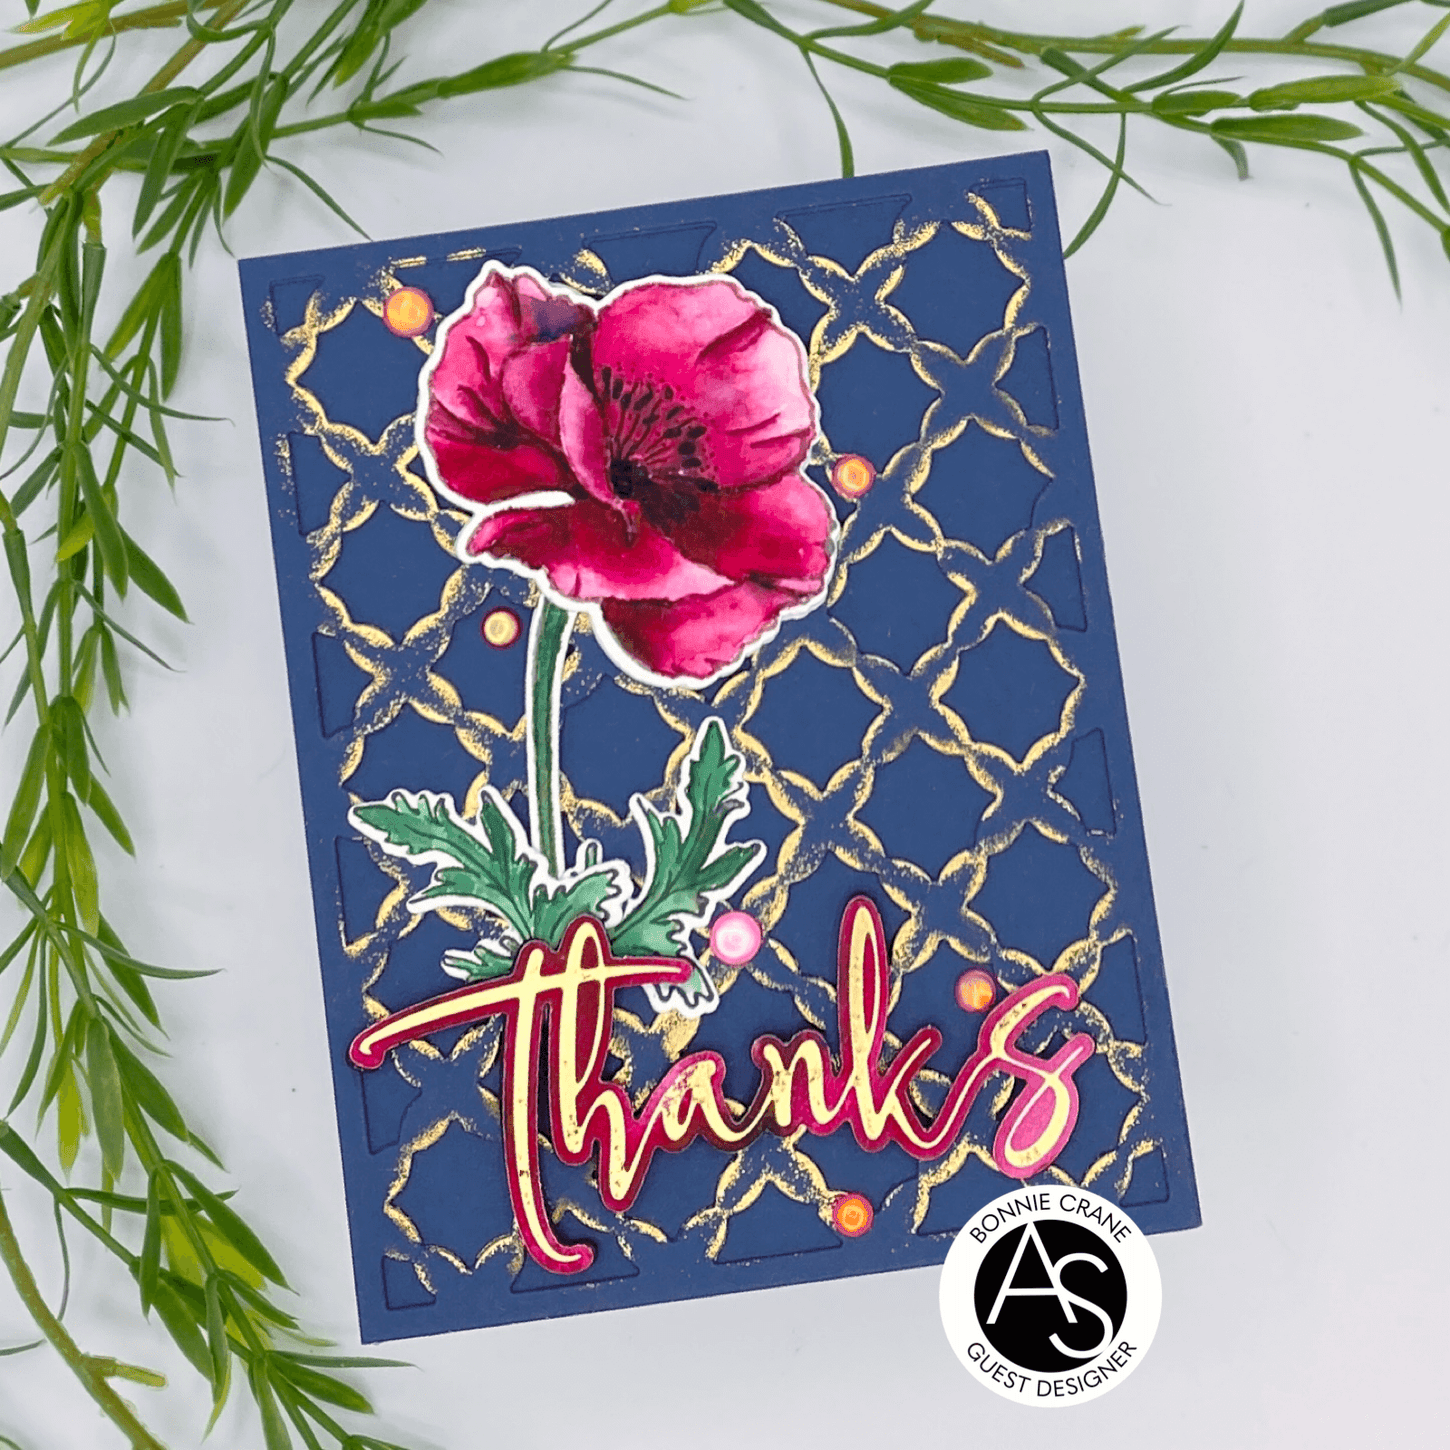 Floral-Lattice-Cover-Die-alex-syberia-designs-cardmaking-stamps-hotfoils-tutoral-new-release-february-handmadecards-poppies